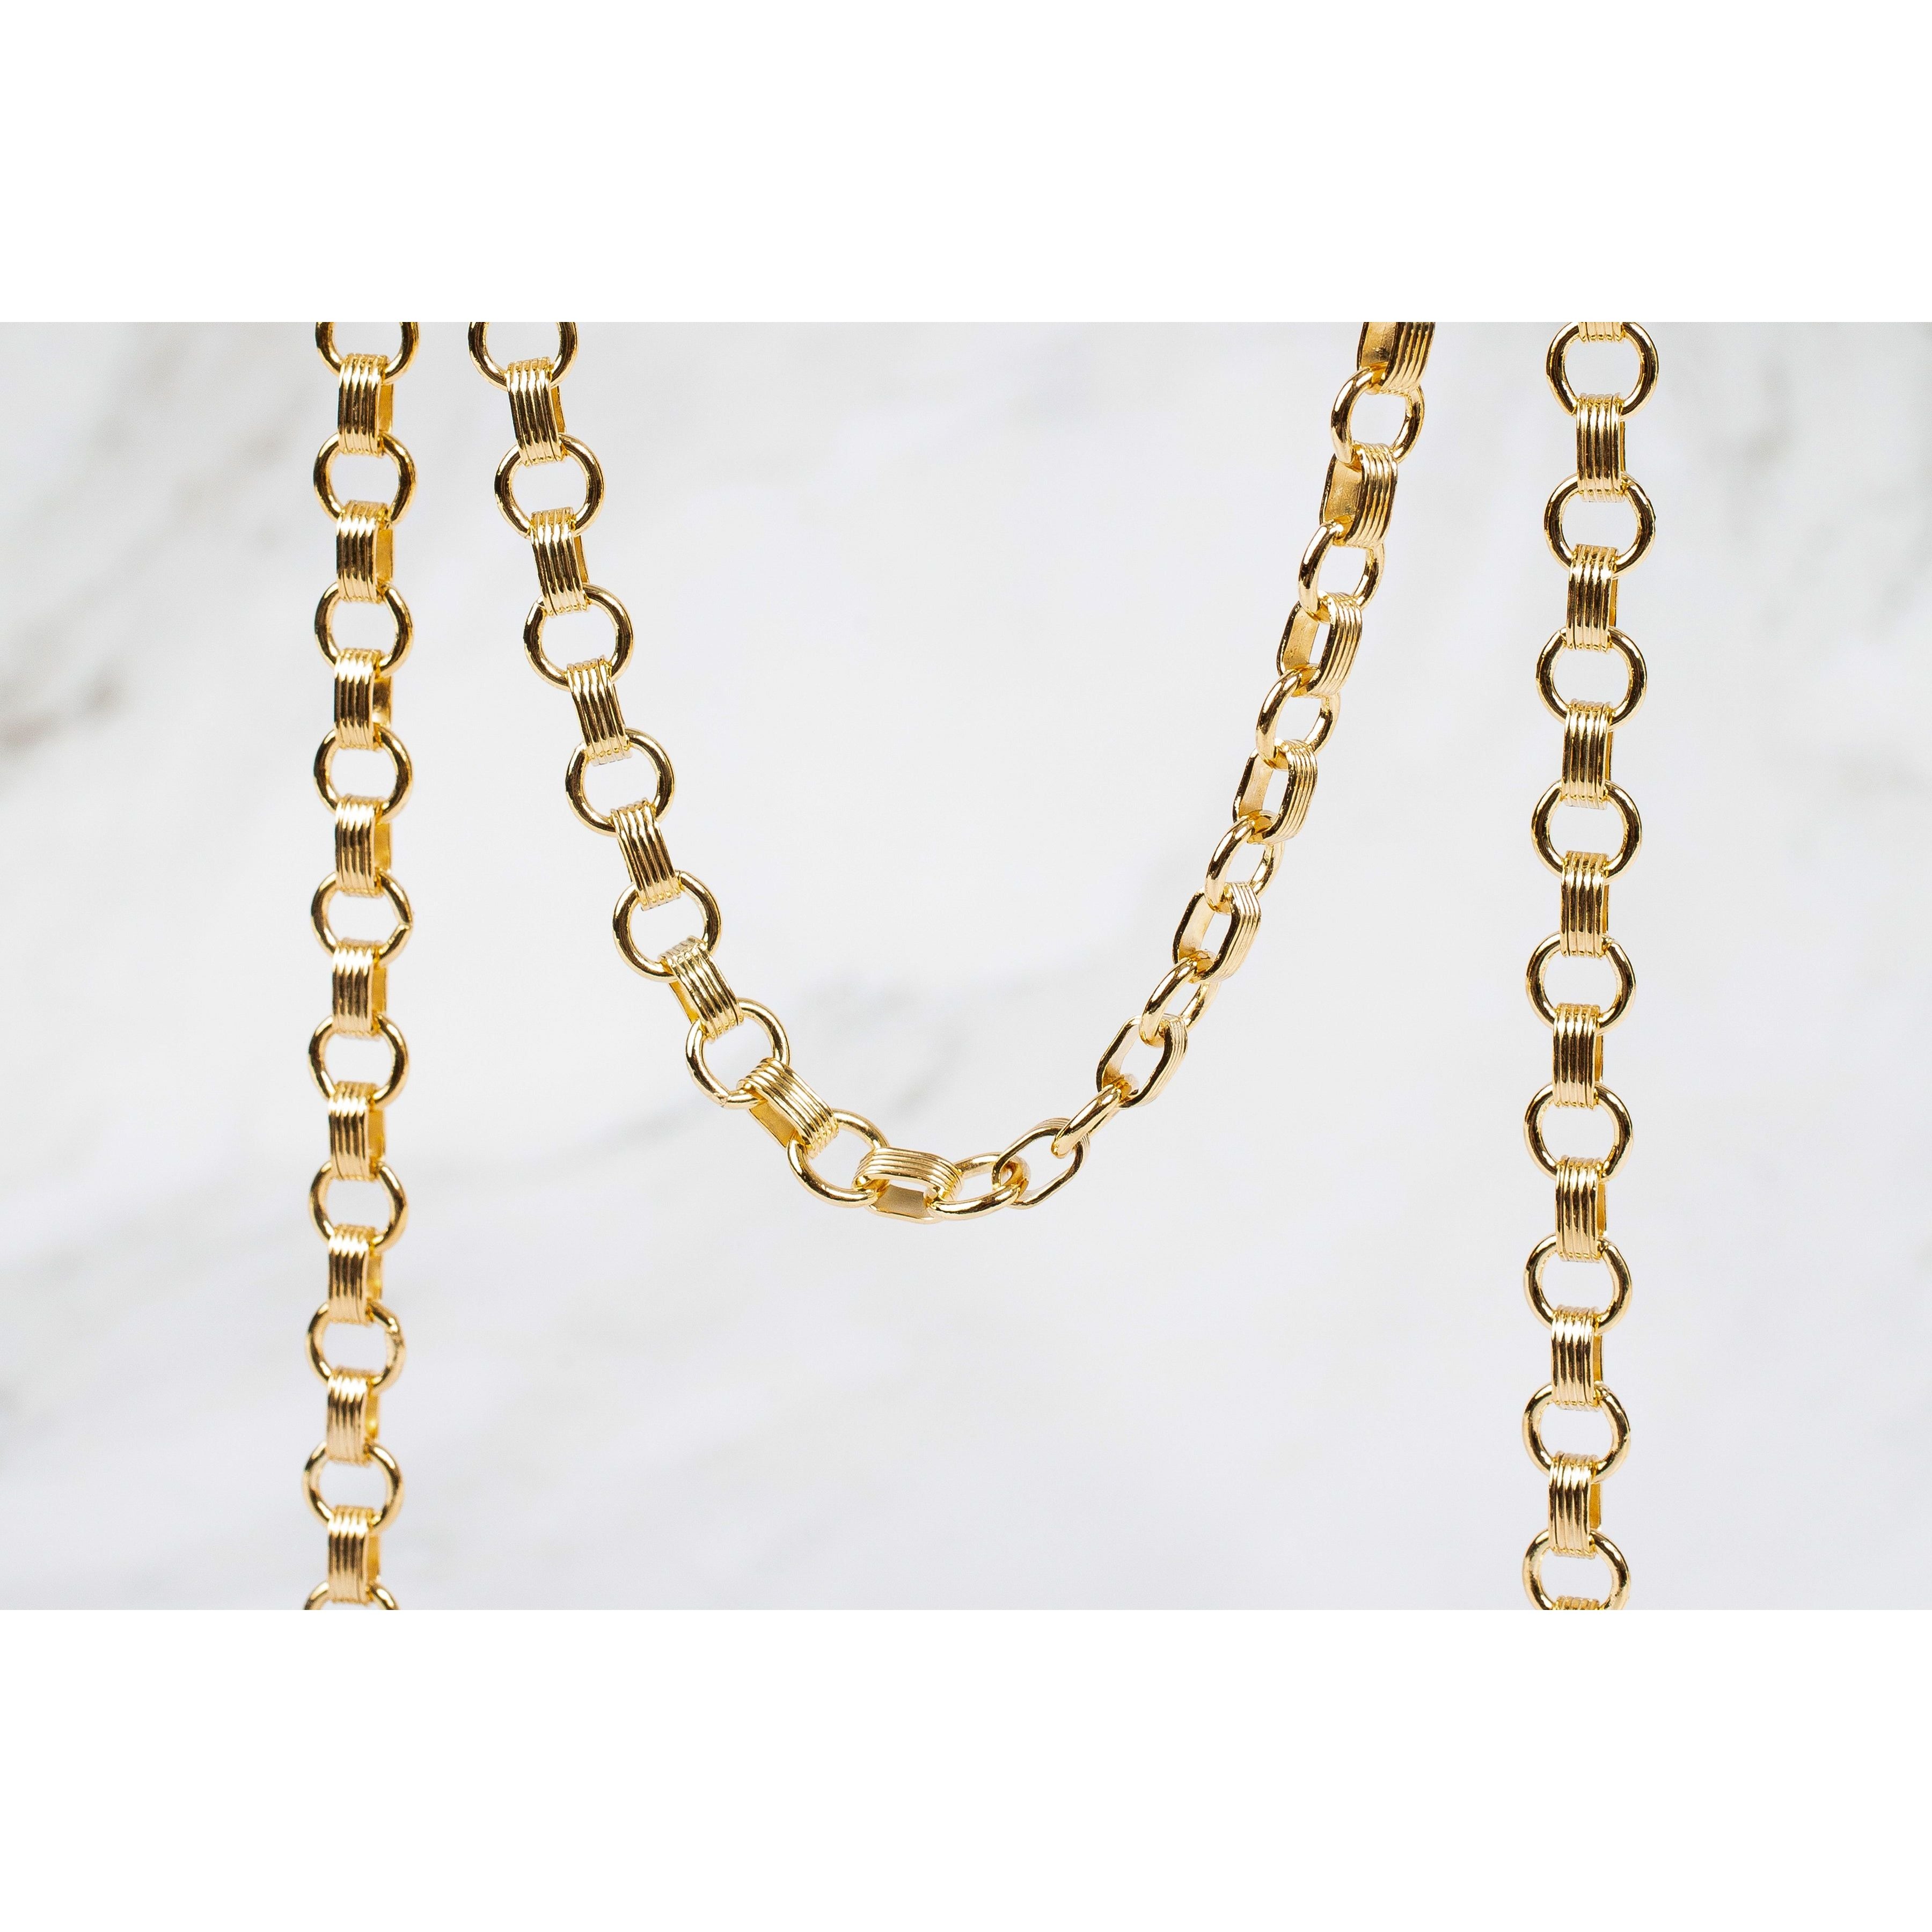 Gold Finding Chain, Gold Plated Jewelry Making Chain, DIY Necklace Chain,  Assorted Styles, 1 foot, GemMartUSA (GPCH)